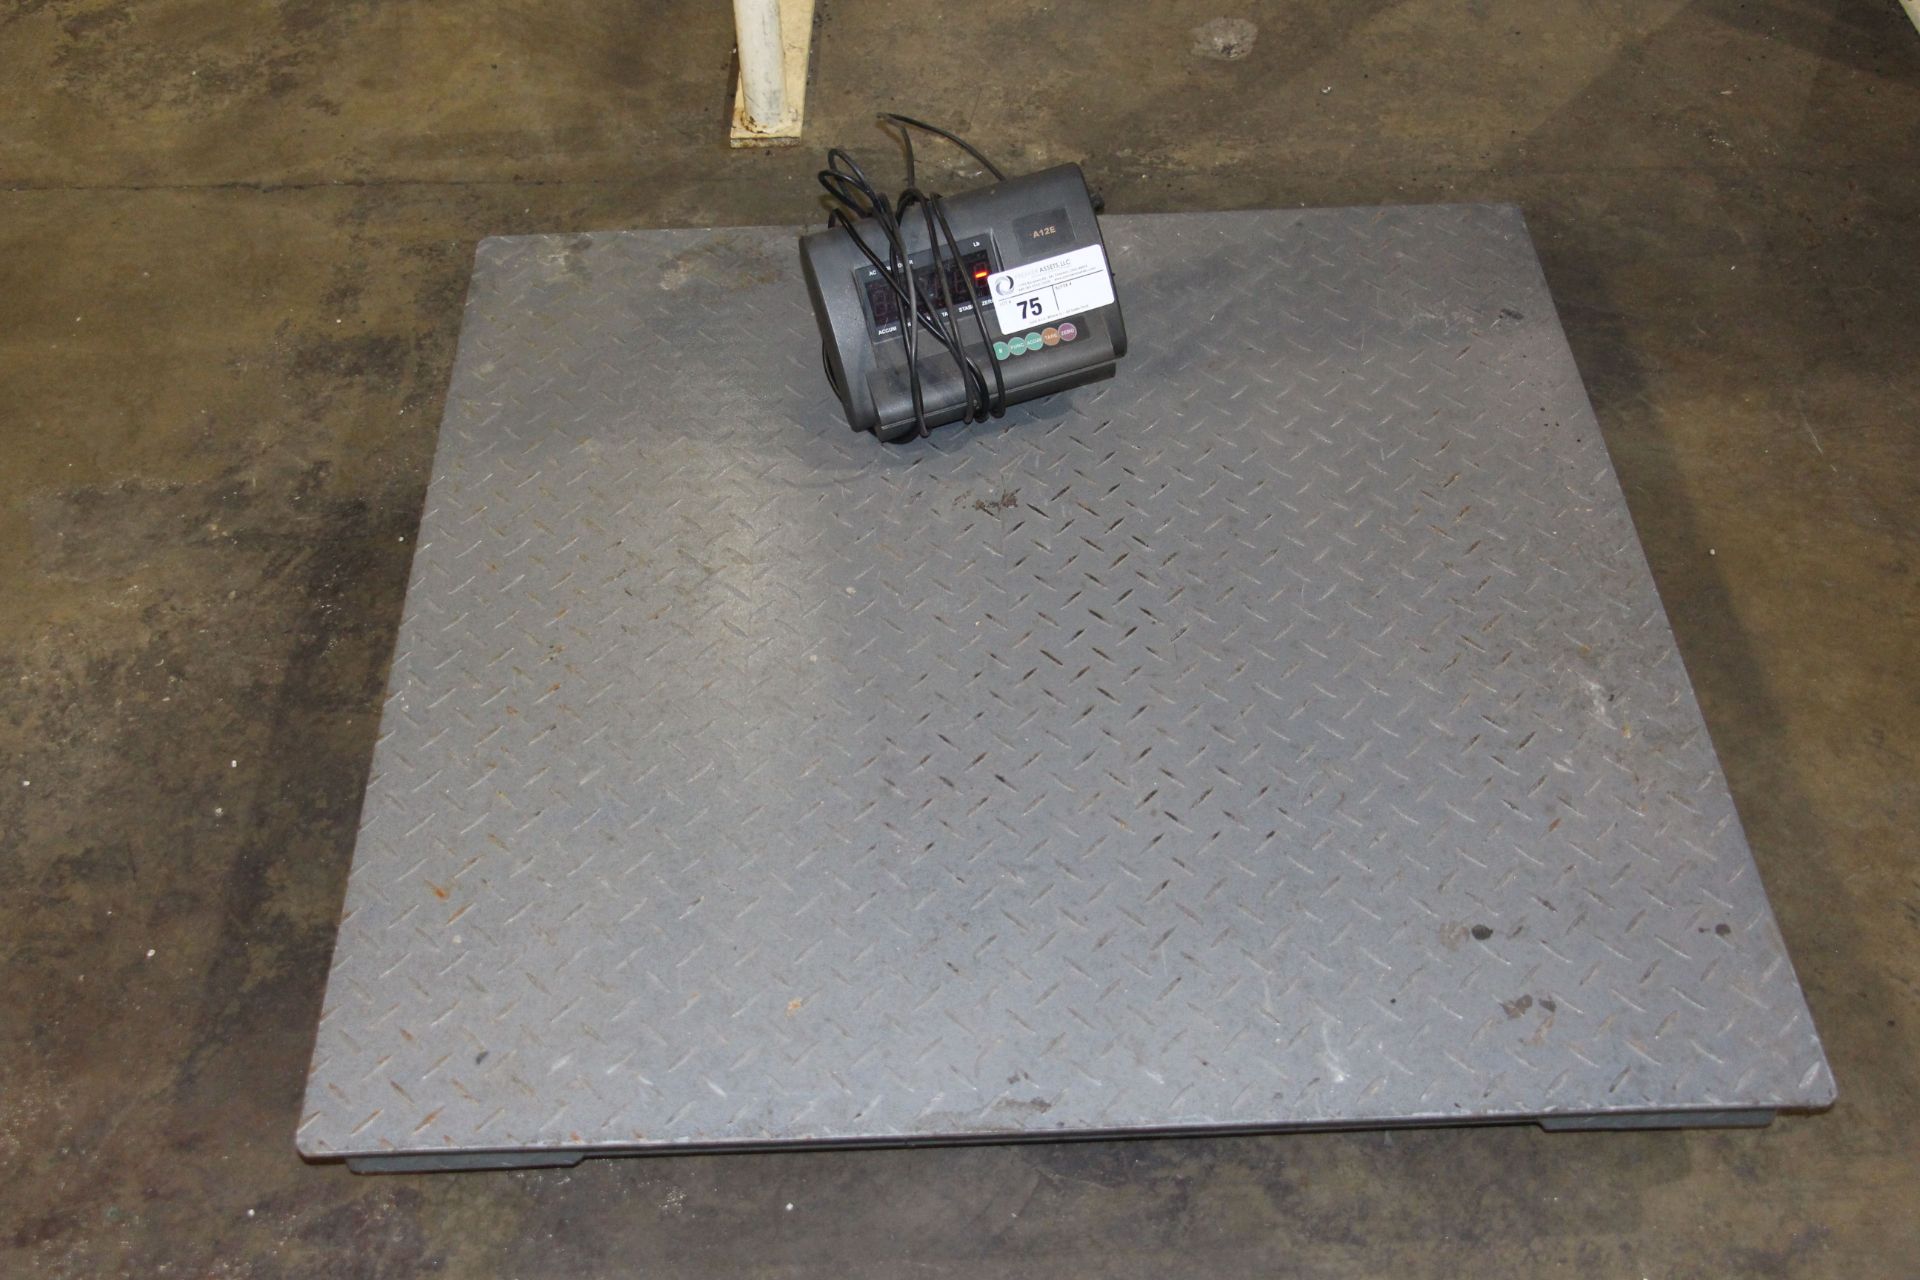 Electronic Platform Scale A12E, 2500 kg capacity, serial number - 1209154